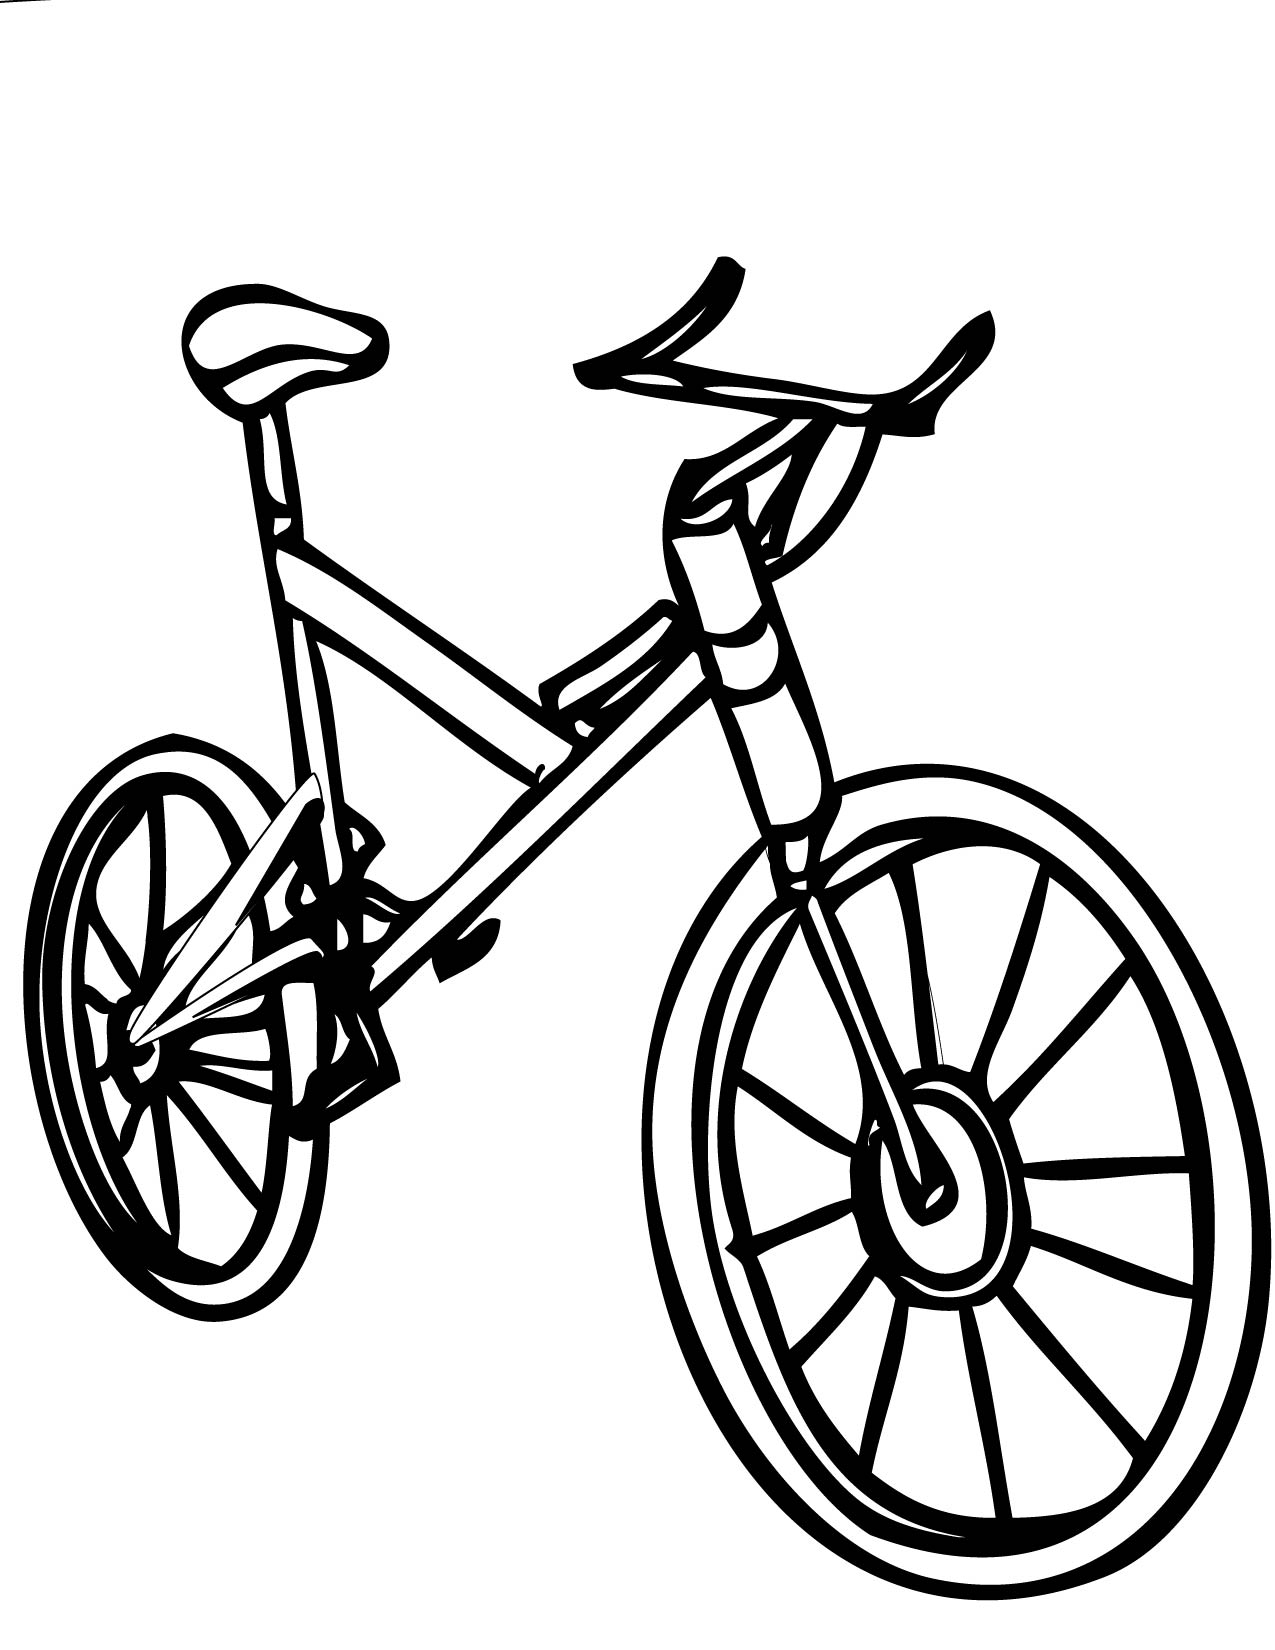 5 Best Images of Bicycle Coloring Printables - Coloring Pages